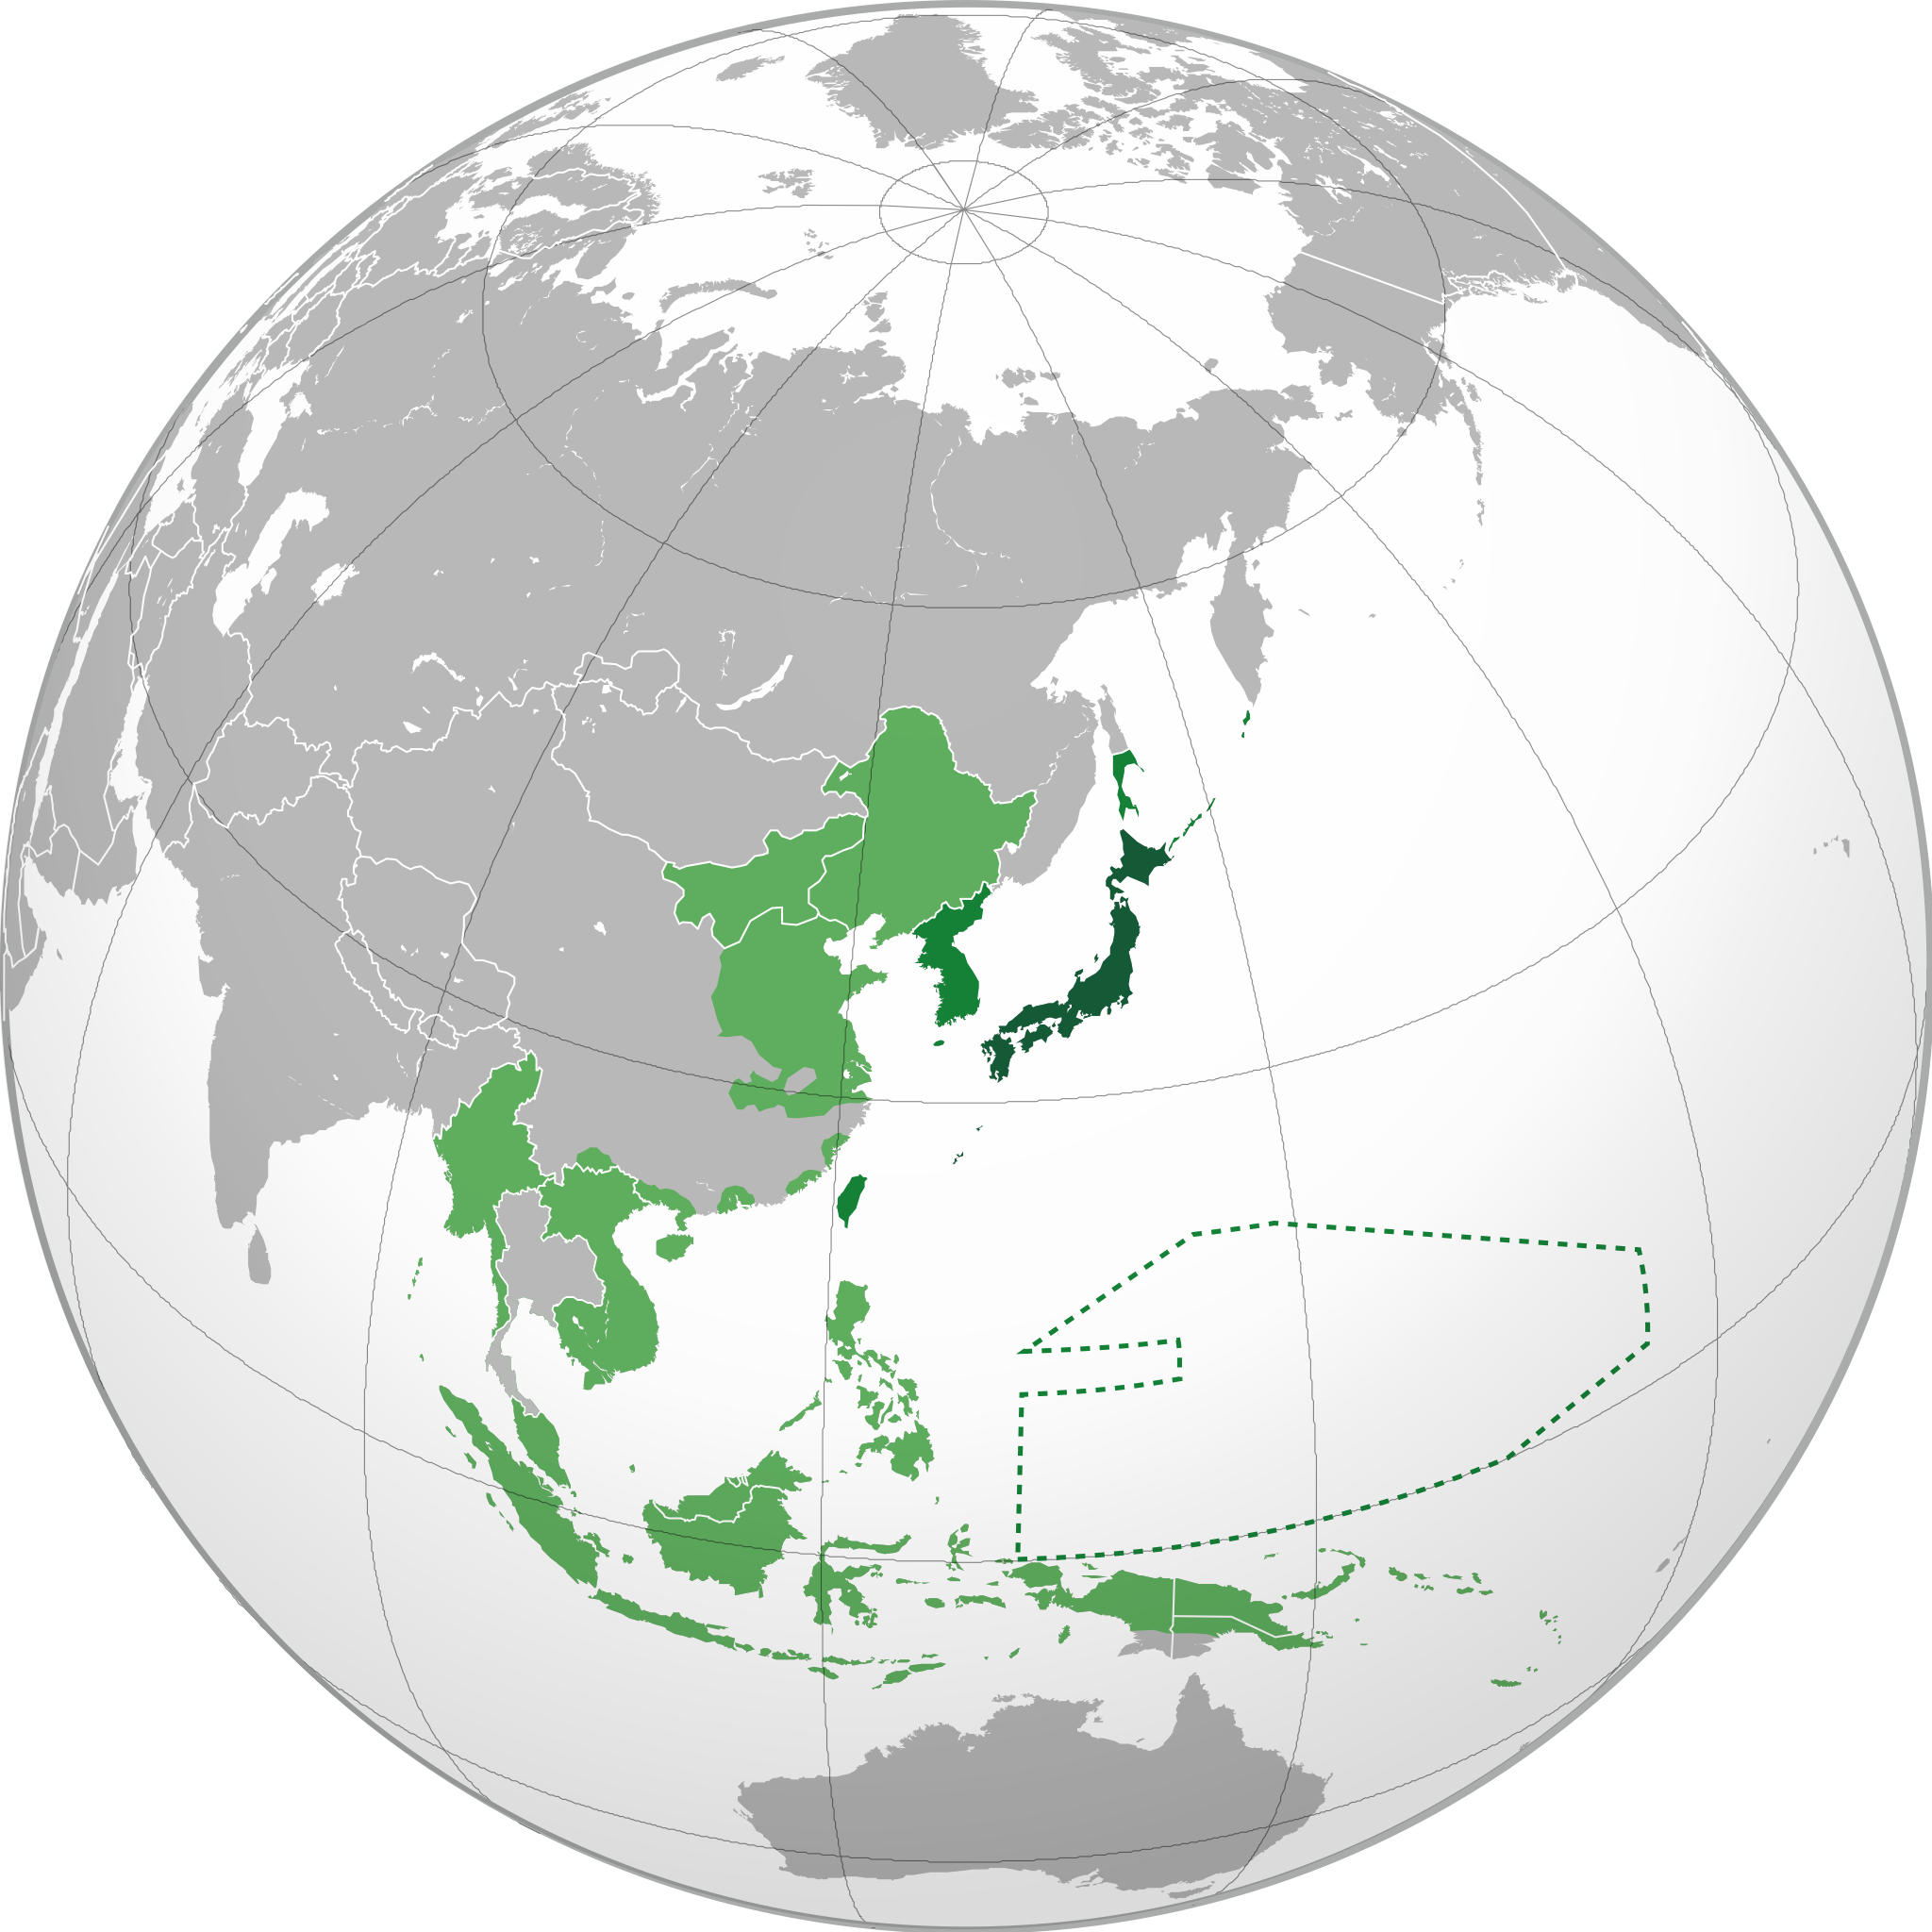 Medium green: Colonies Light green: Puppet states and occupied territories